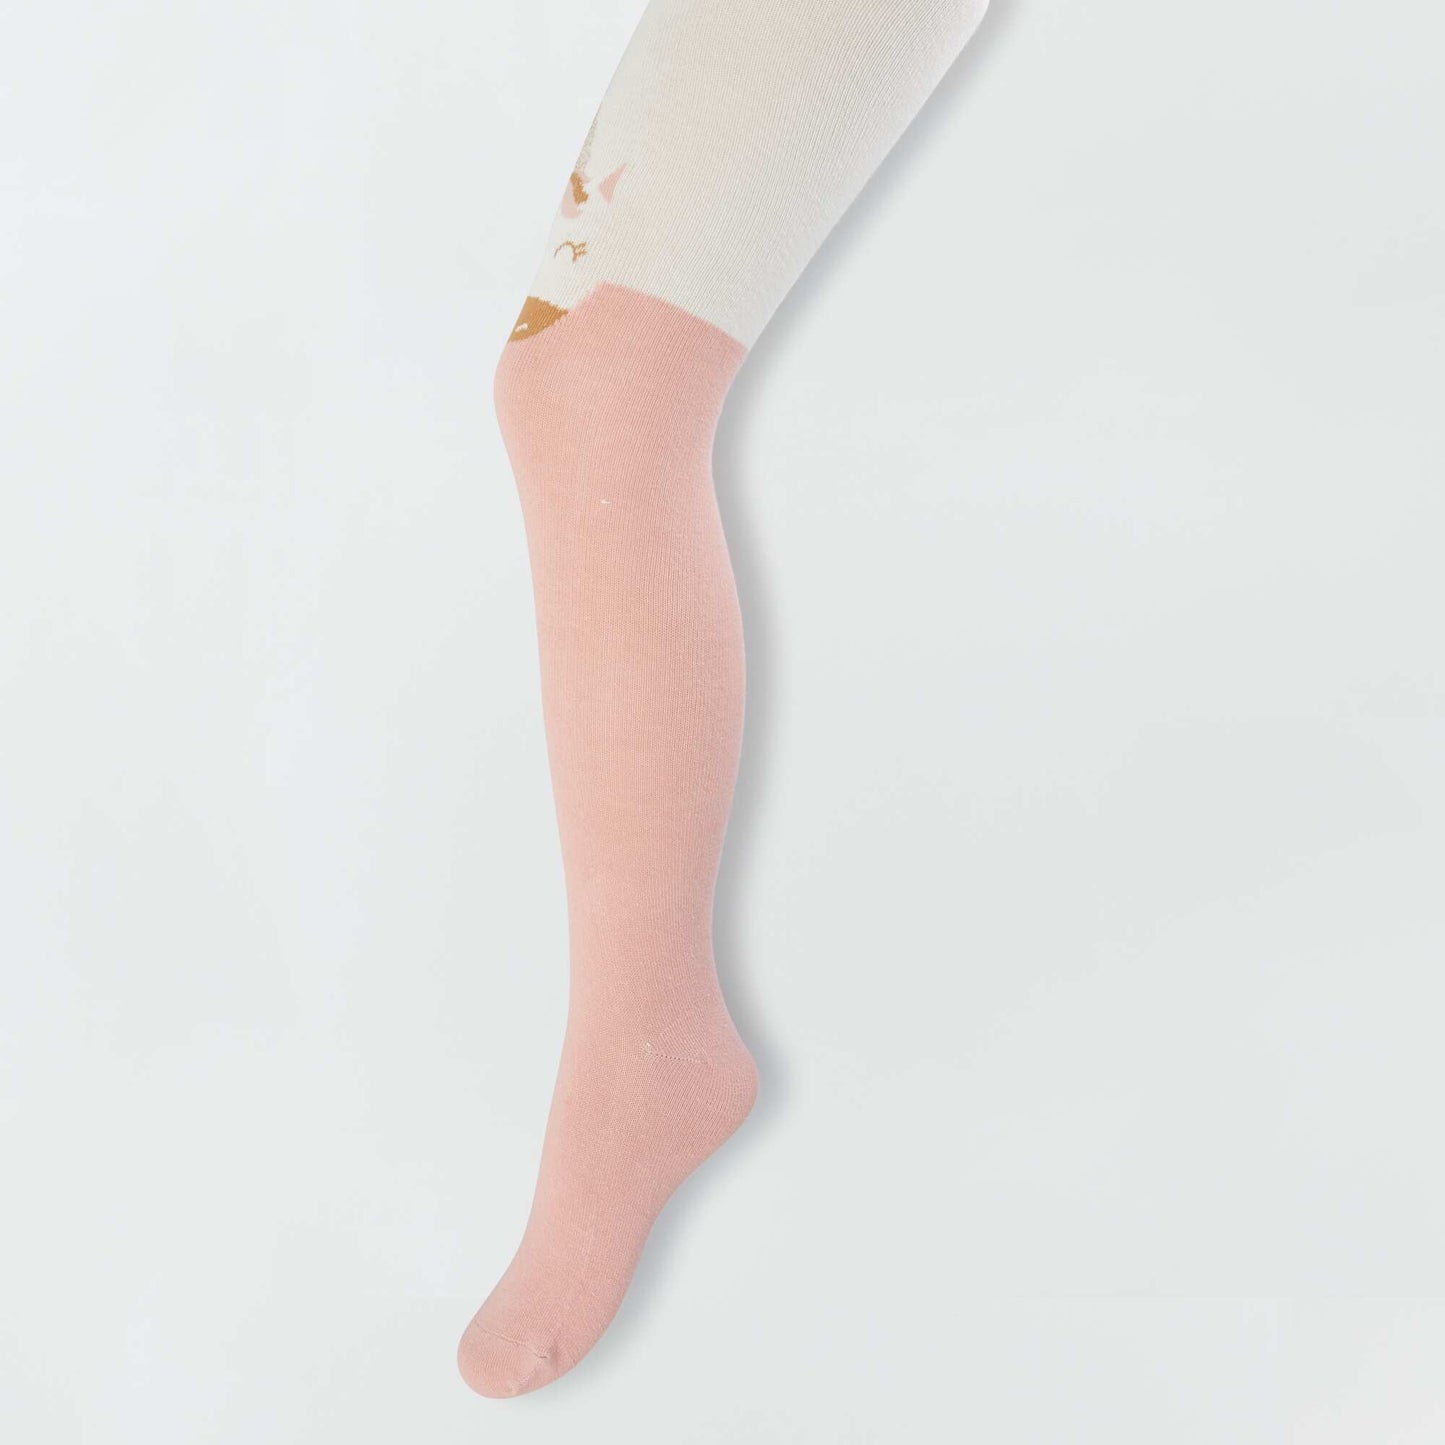 Warm tights with stylish print - Pack of two pairs PINK